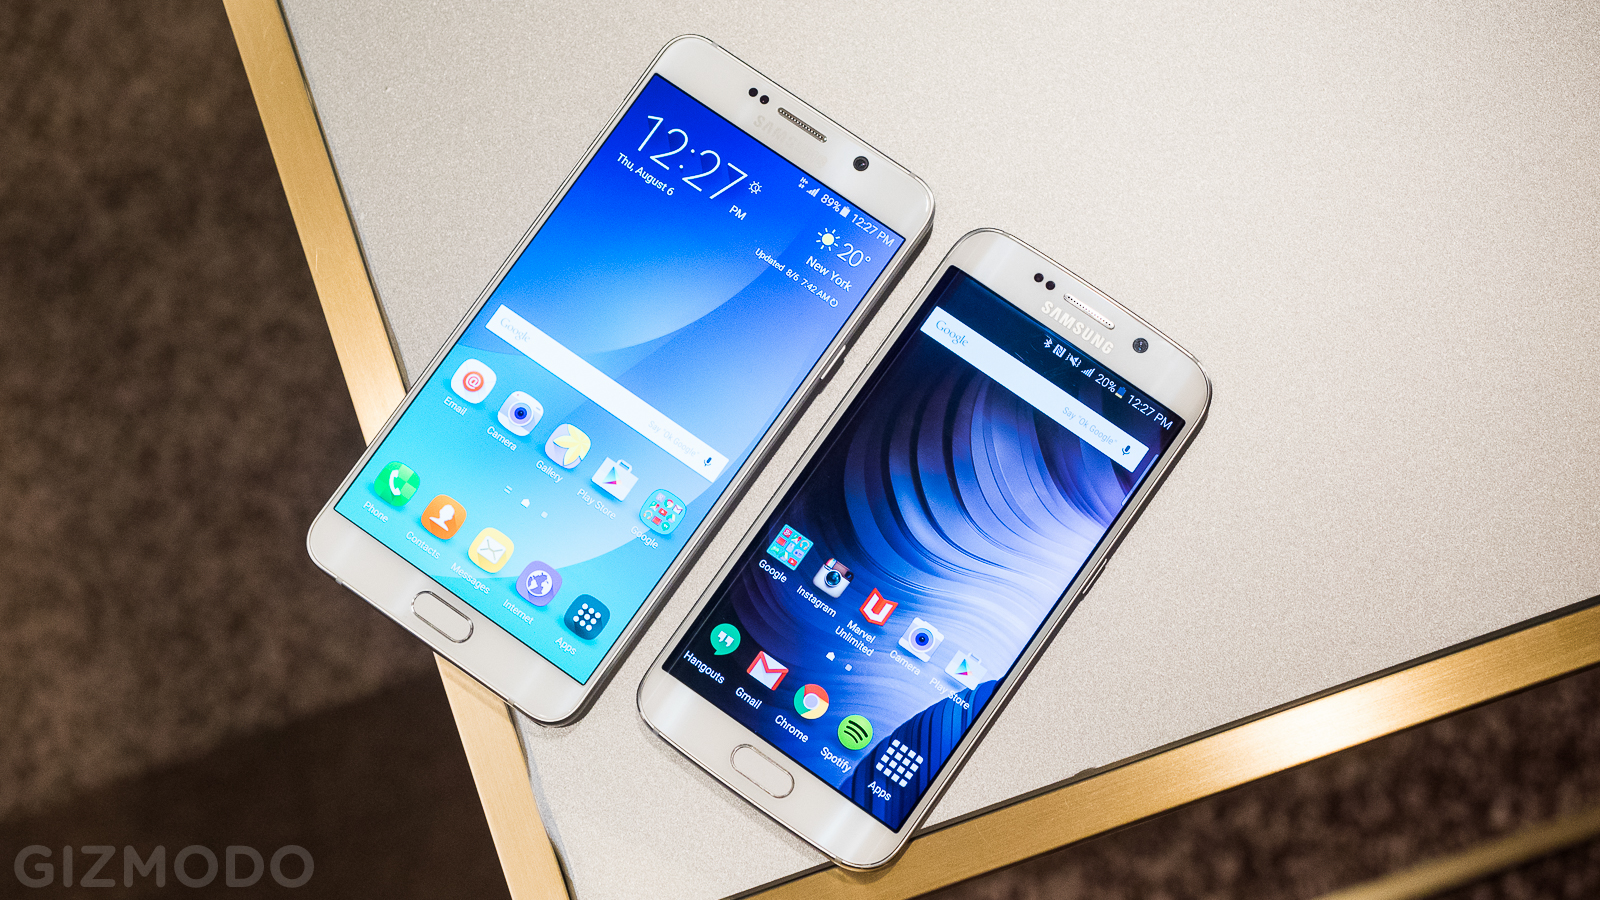 The Four Things You Need To Know About The New Galaxy Note 5